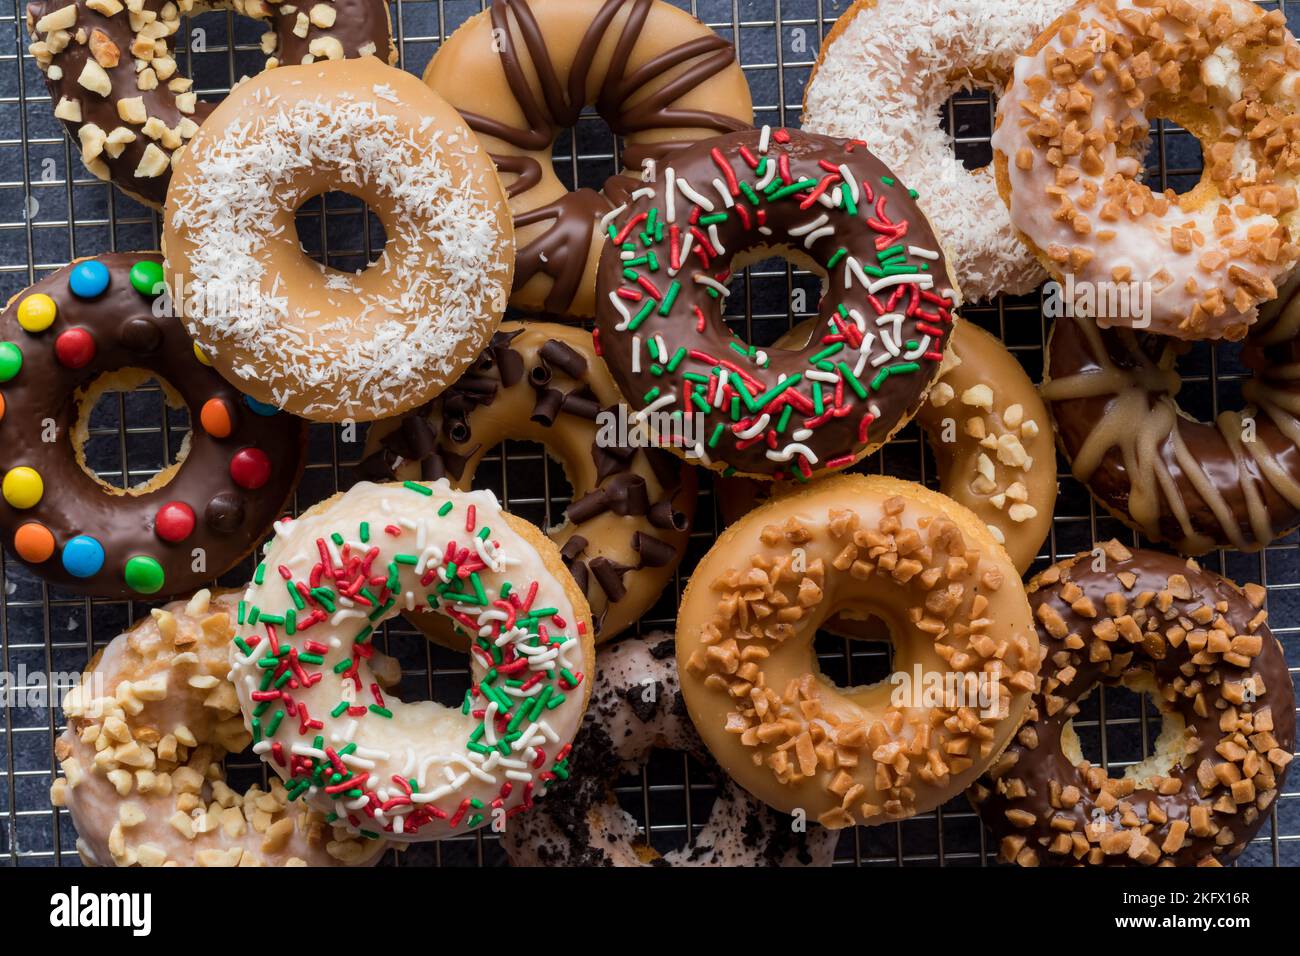 A pile of delicious homemade donuts with various glazes and toppings. Stock Photo